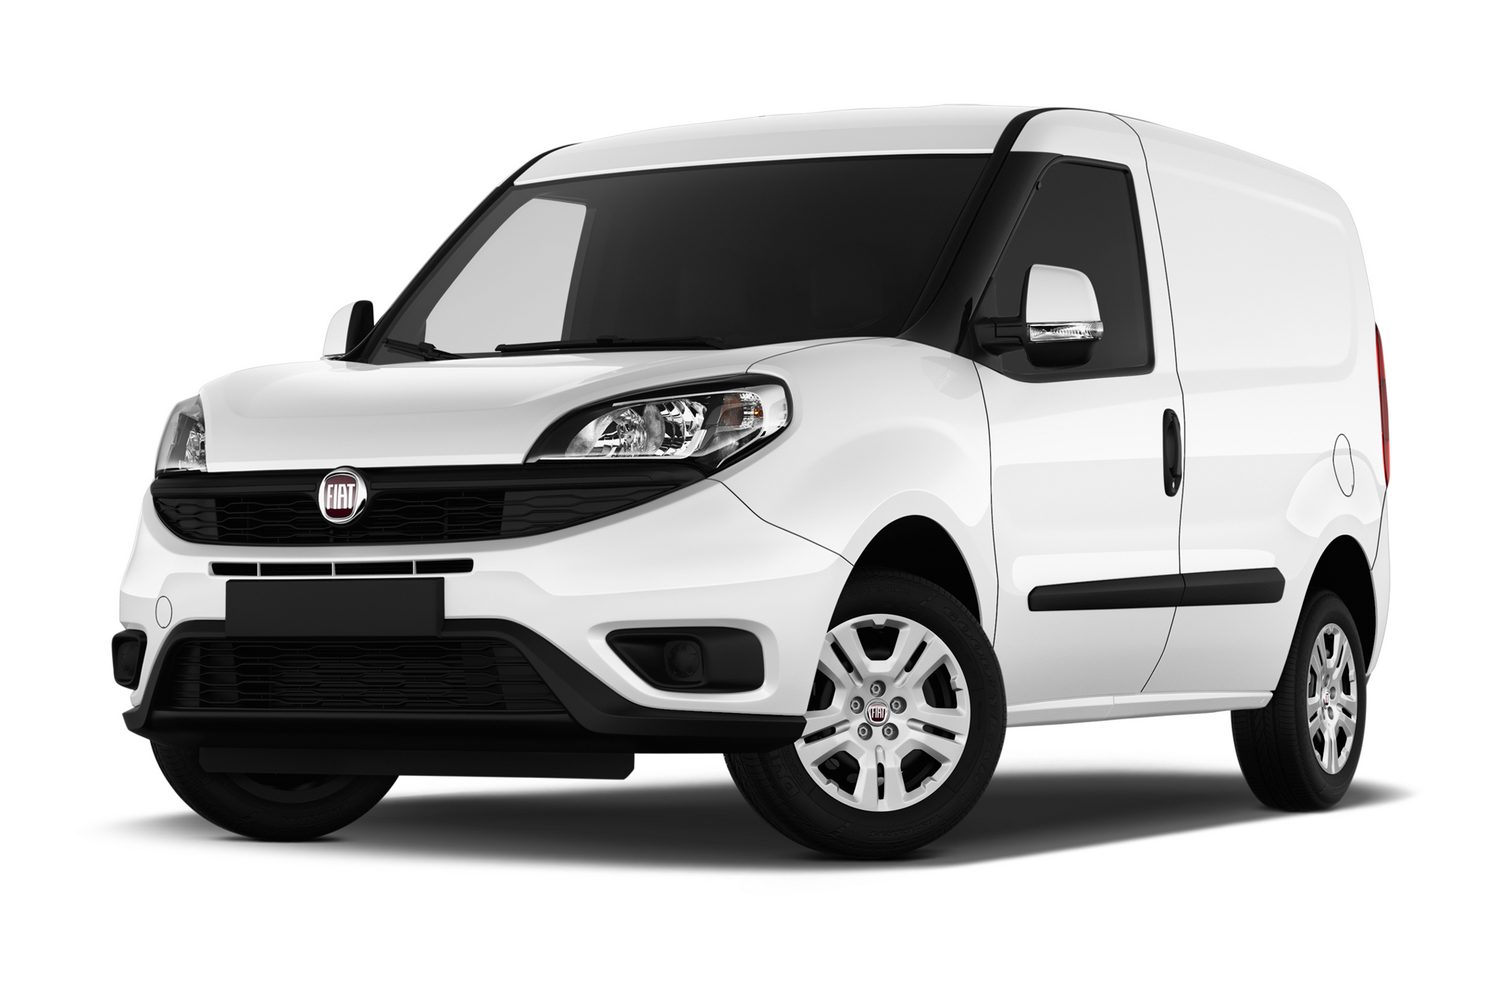 Van Reviews | What would it cost to tax a 1.3 van annually? | CompleteVan.ie